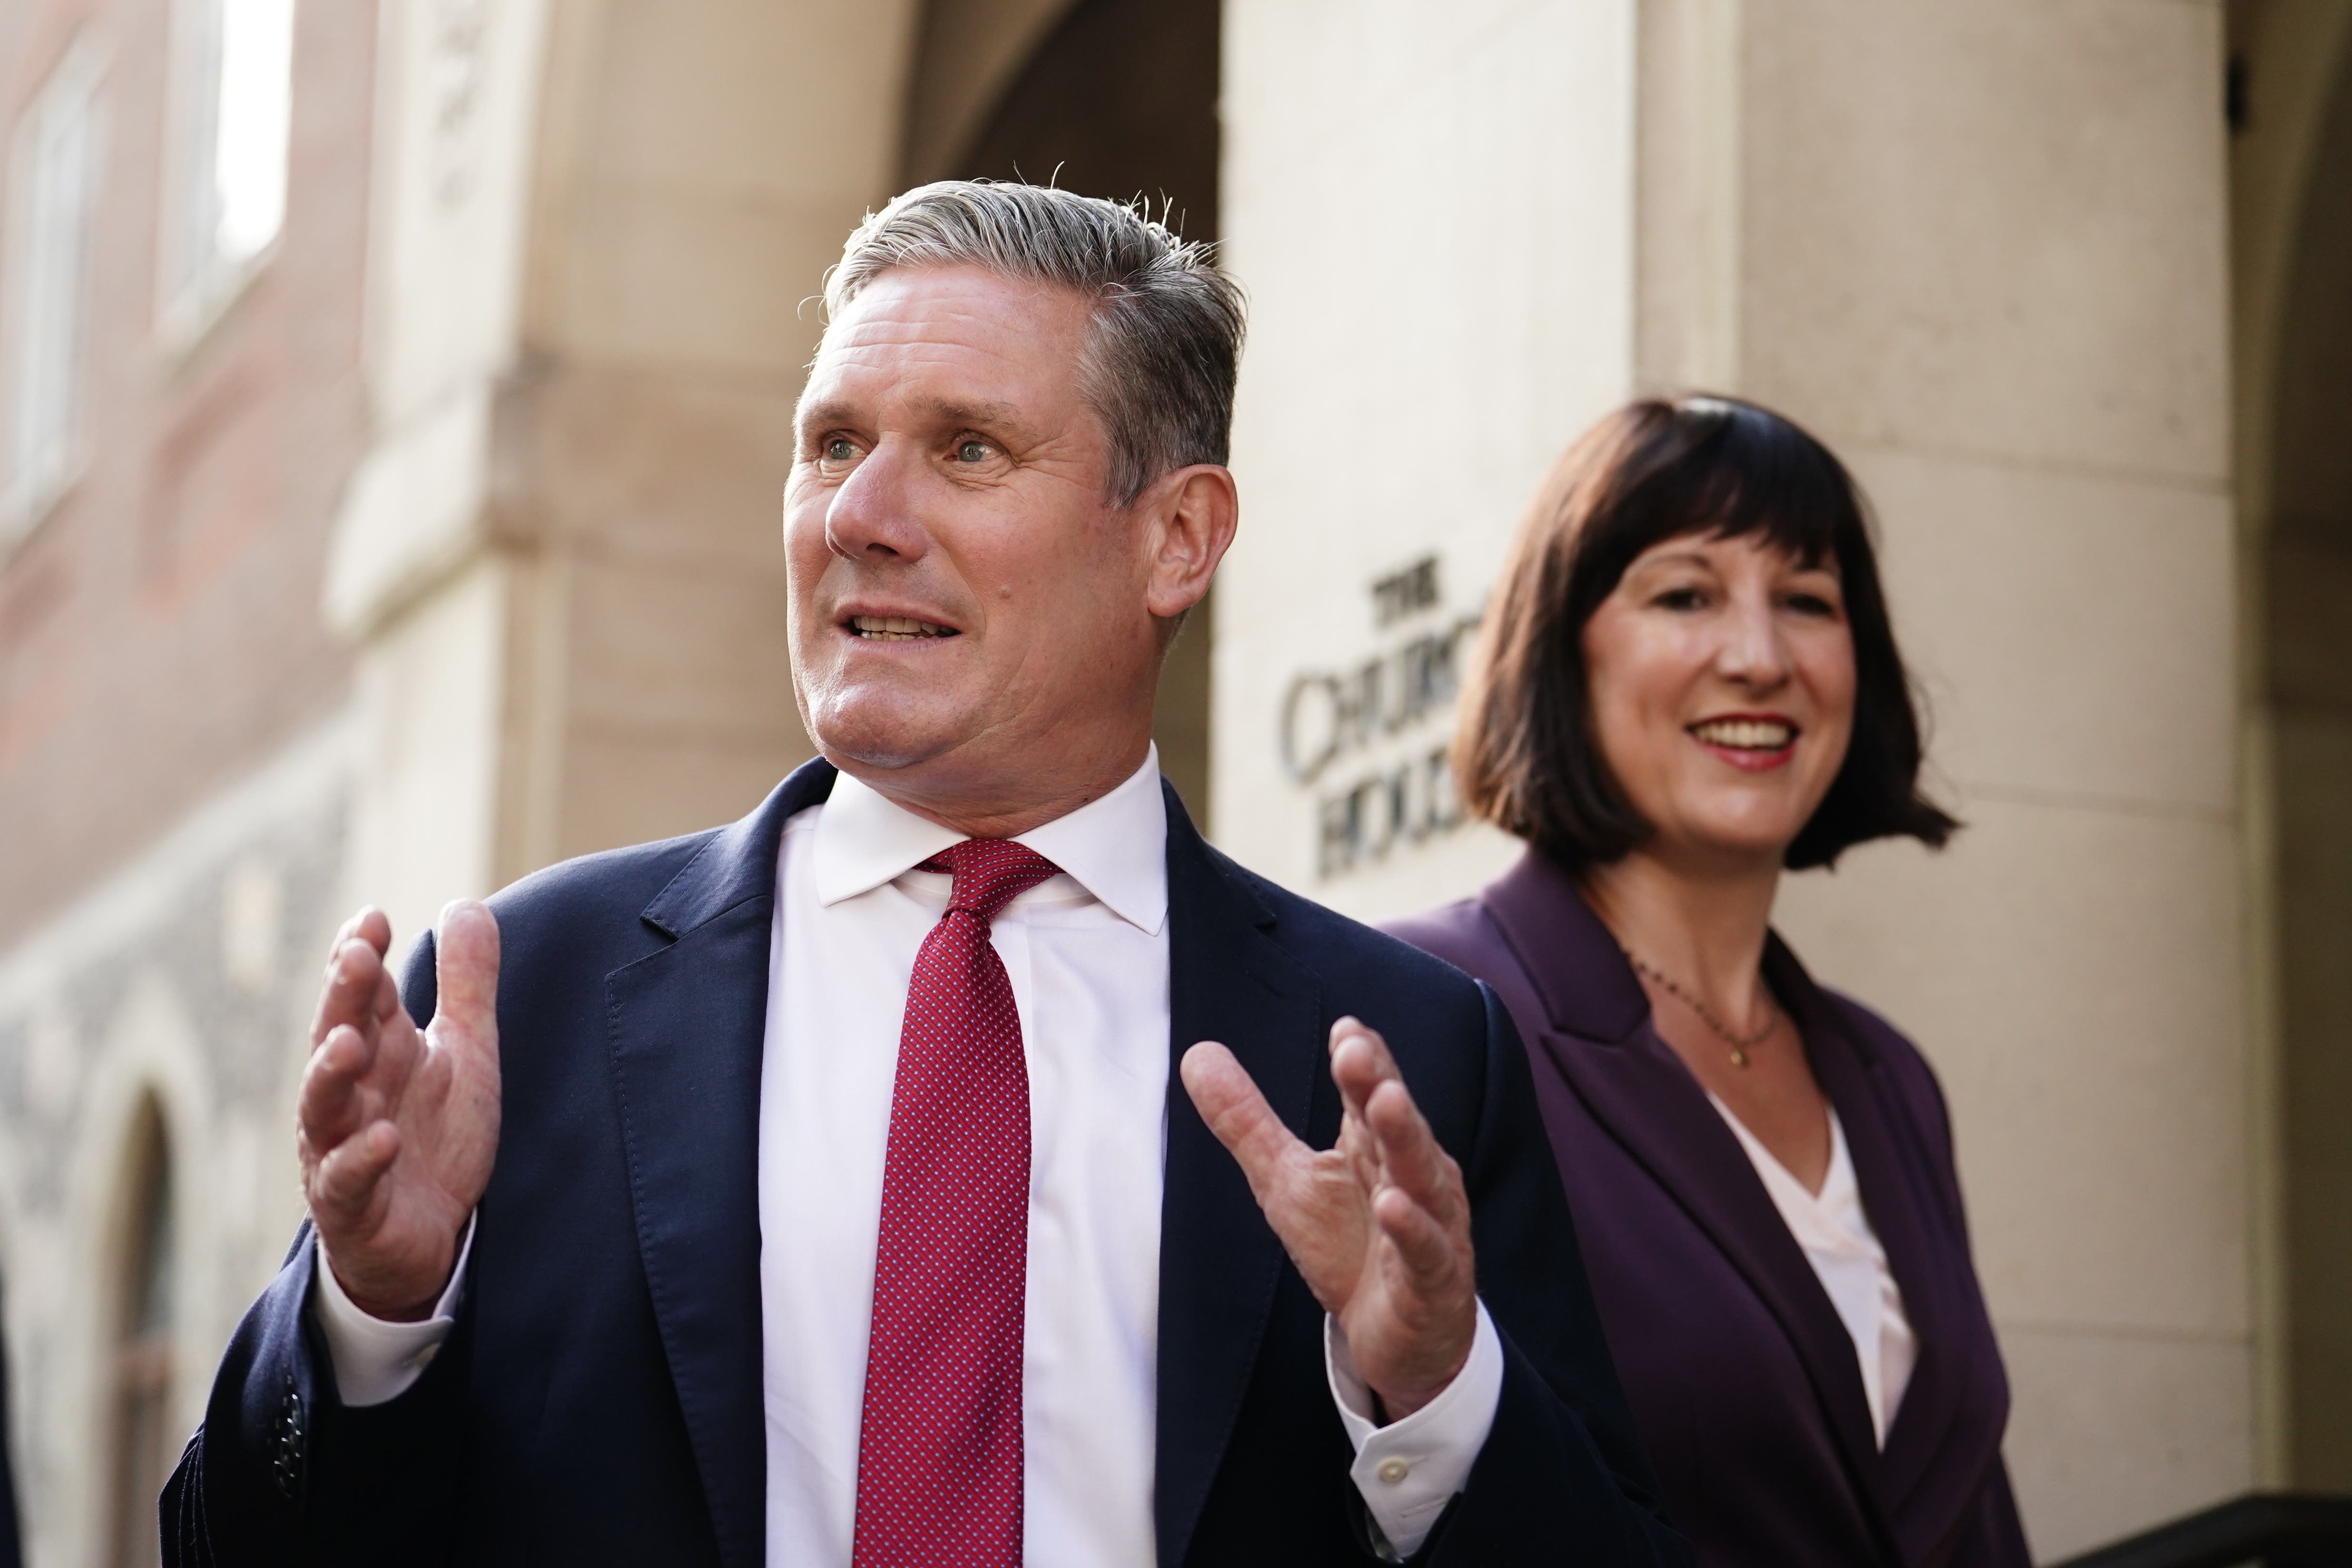 Starmer’s reign in opposition has been characterised by woolliness, an unwillingness to commit – why would business be any different?